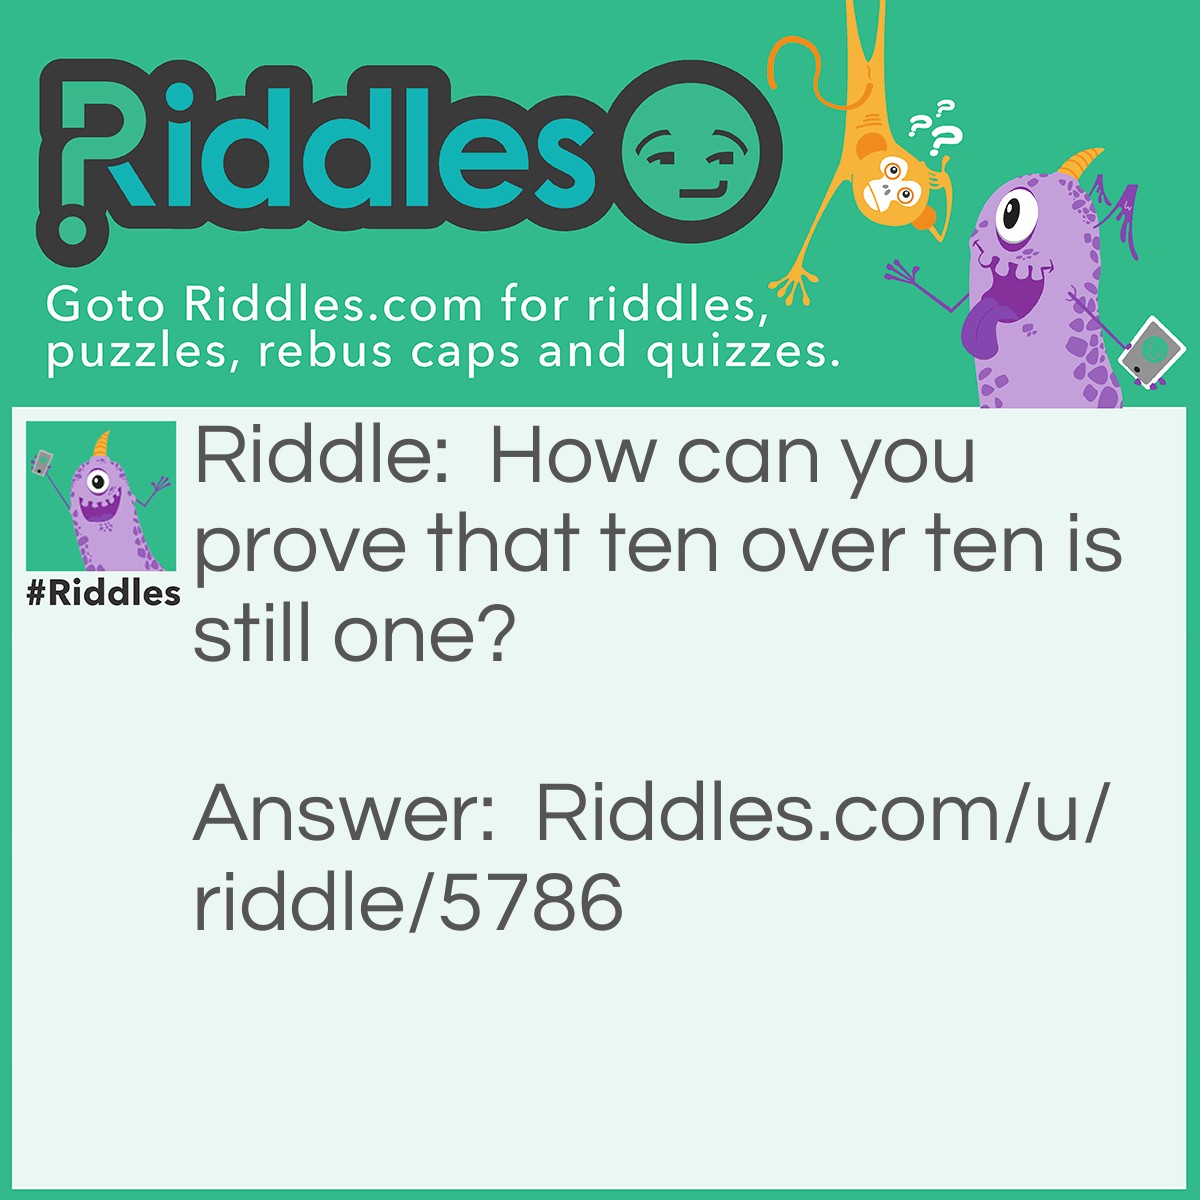 Riddle: How can you prove that ten over ten is still one? Answer: Have an orgy.